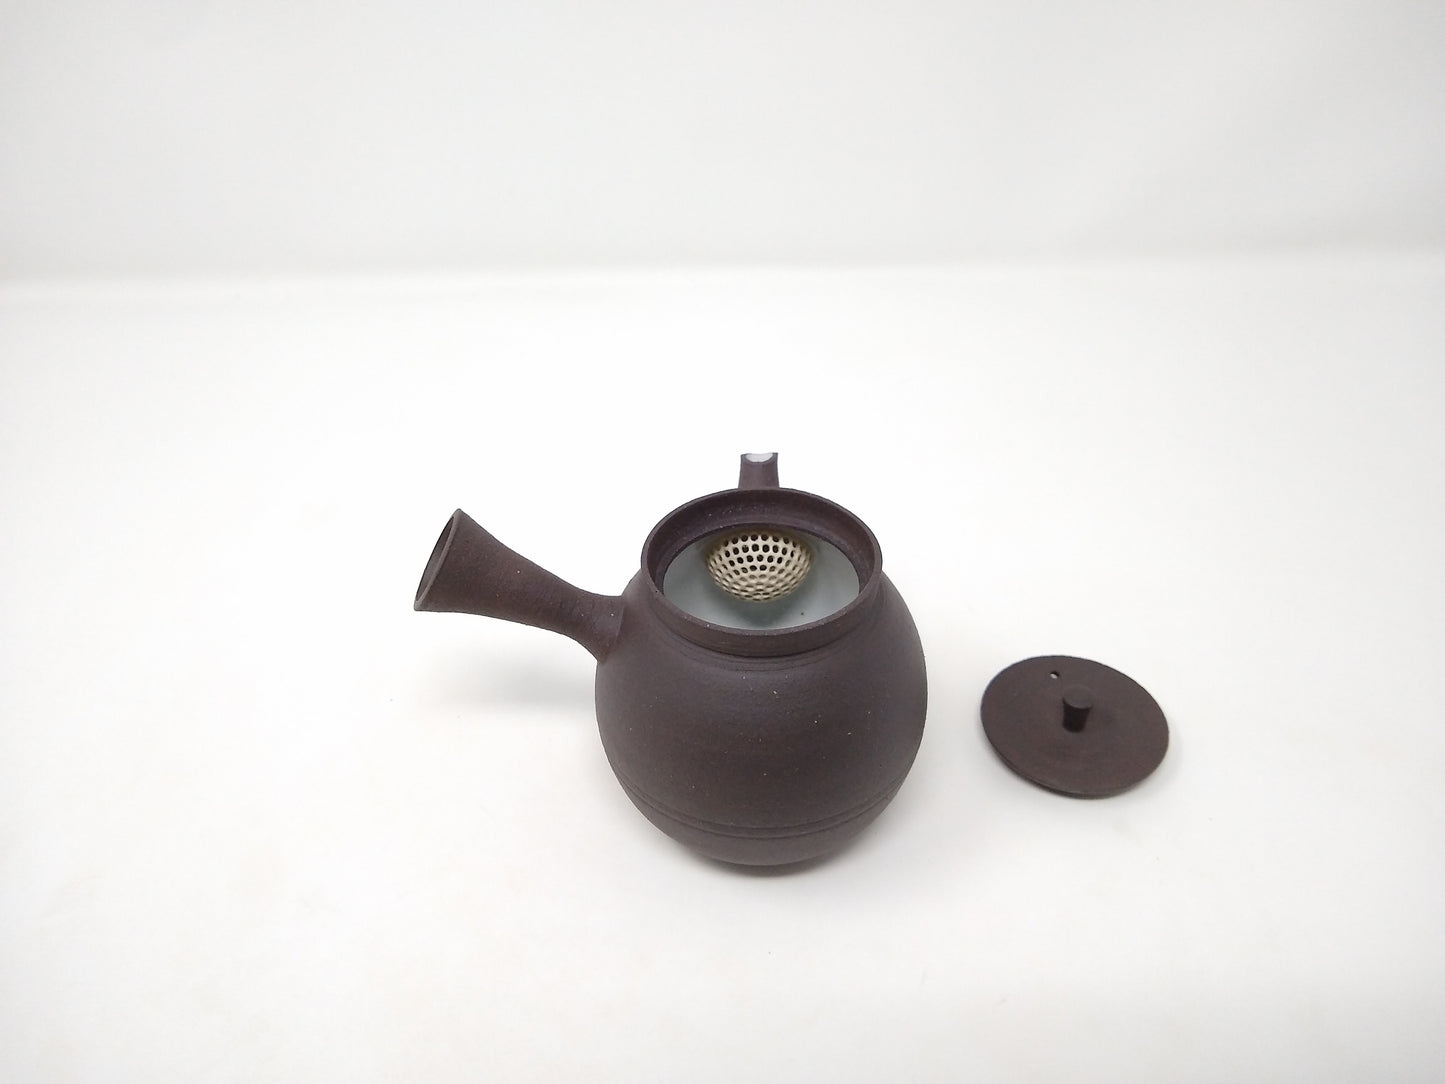 210ml Kyusu with two 50ml cups